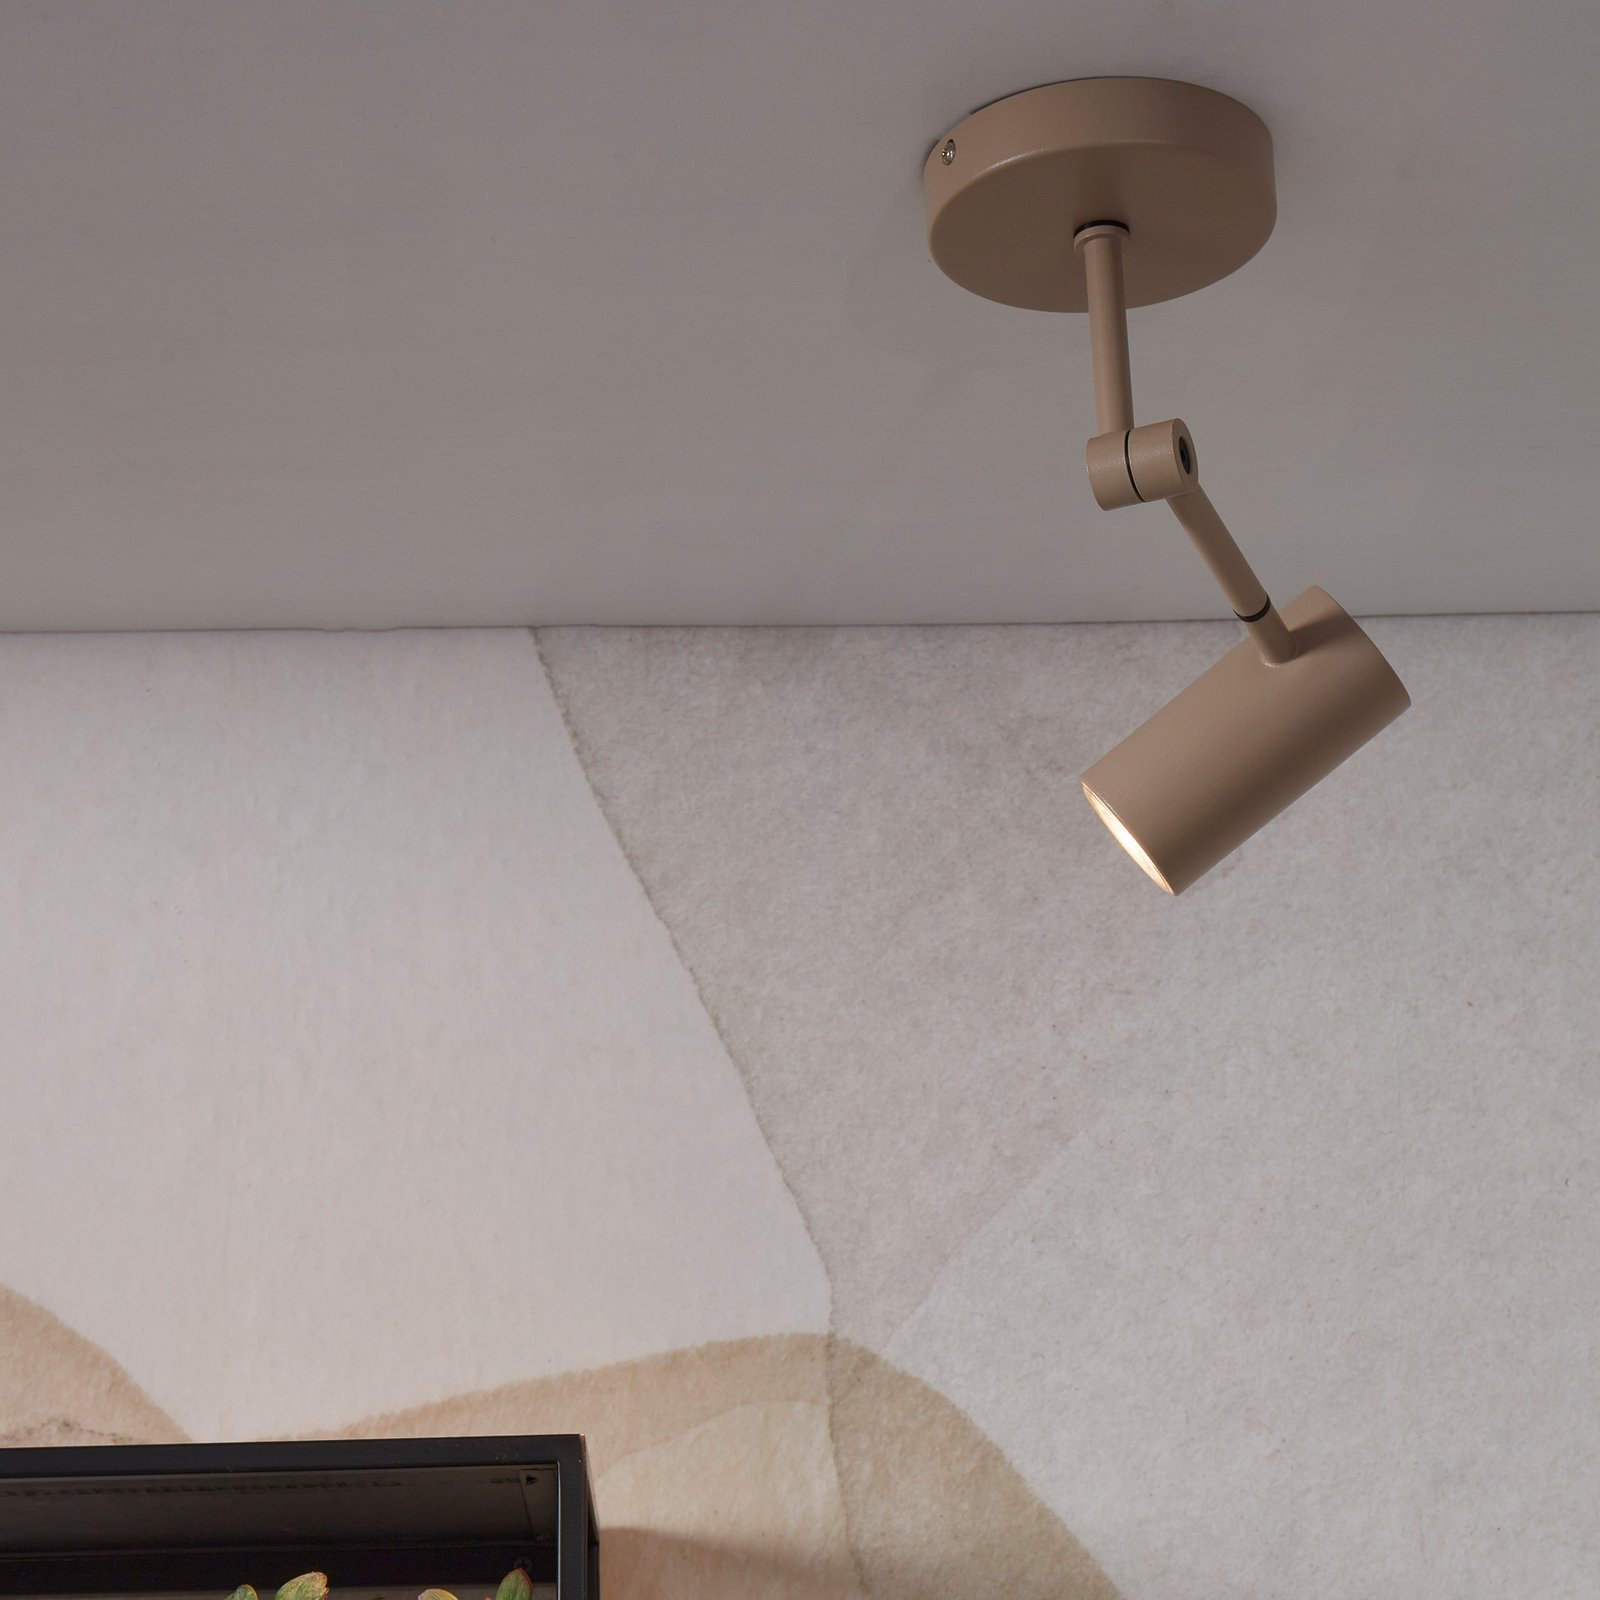 It's about RoMi downlight Montreux, sand, adjustable